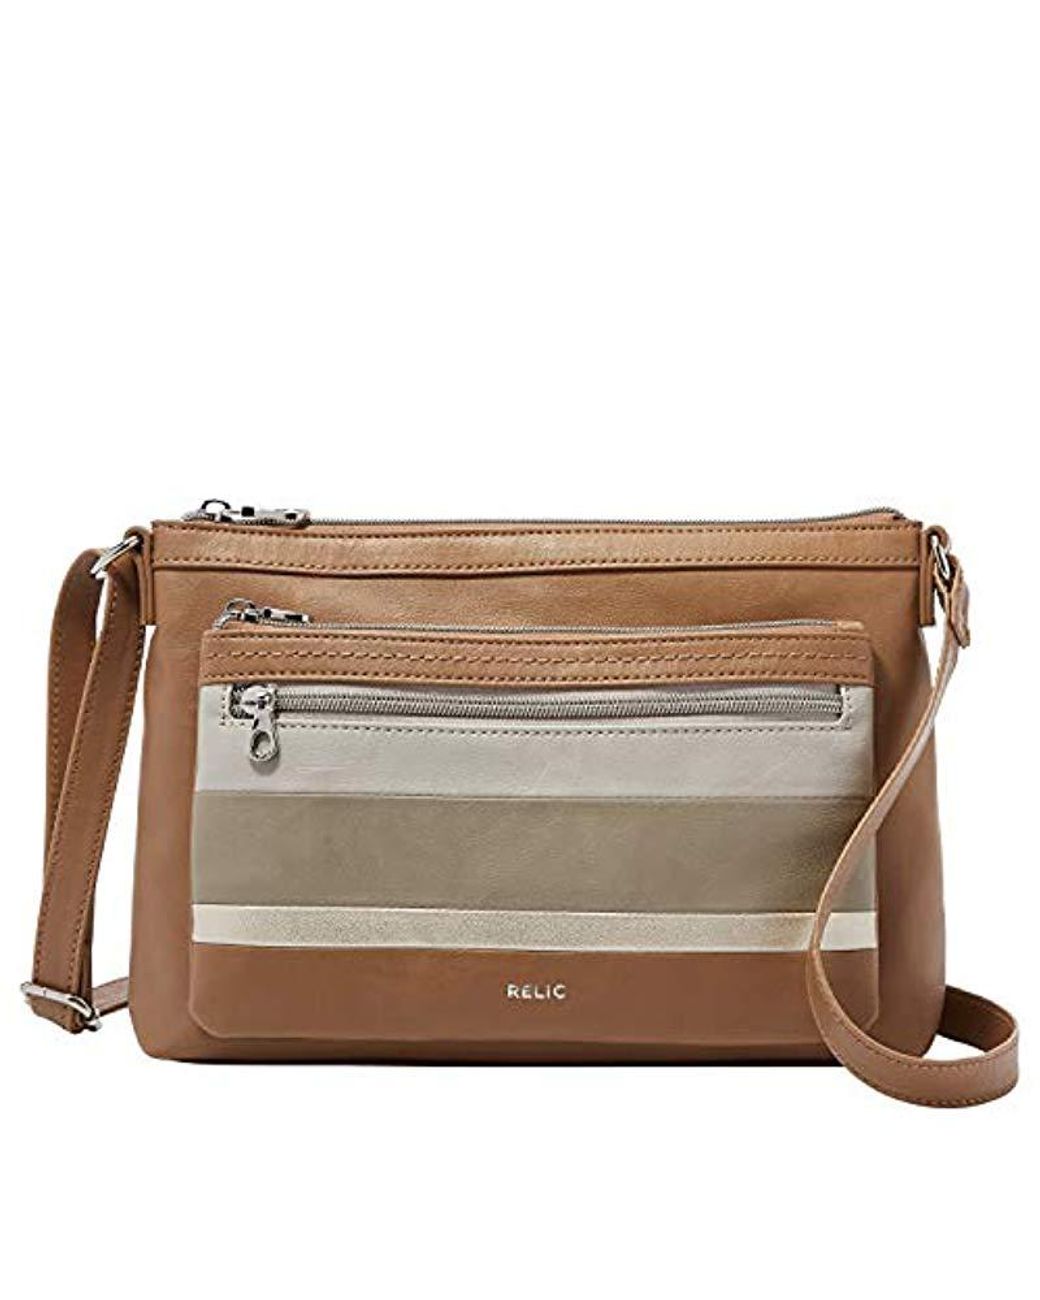 Fossil Relic By Evie Crossbody Handbag Purse in Brown | Lyst